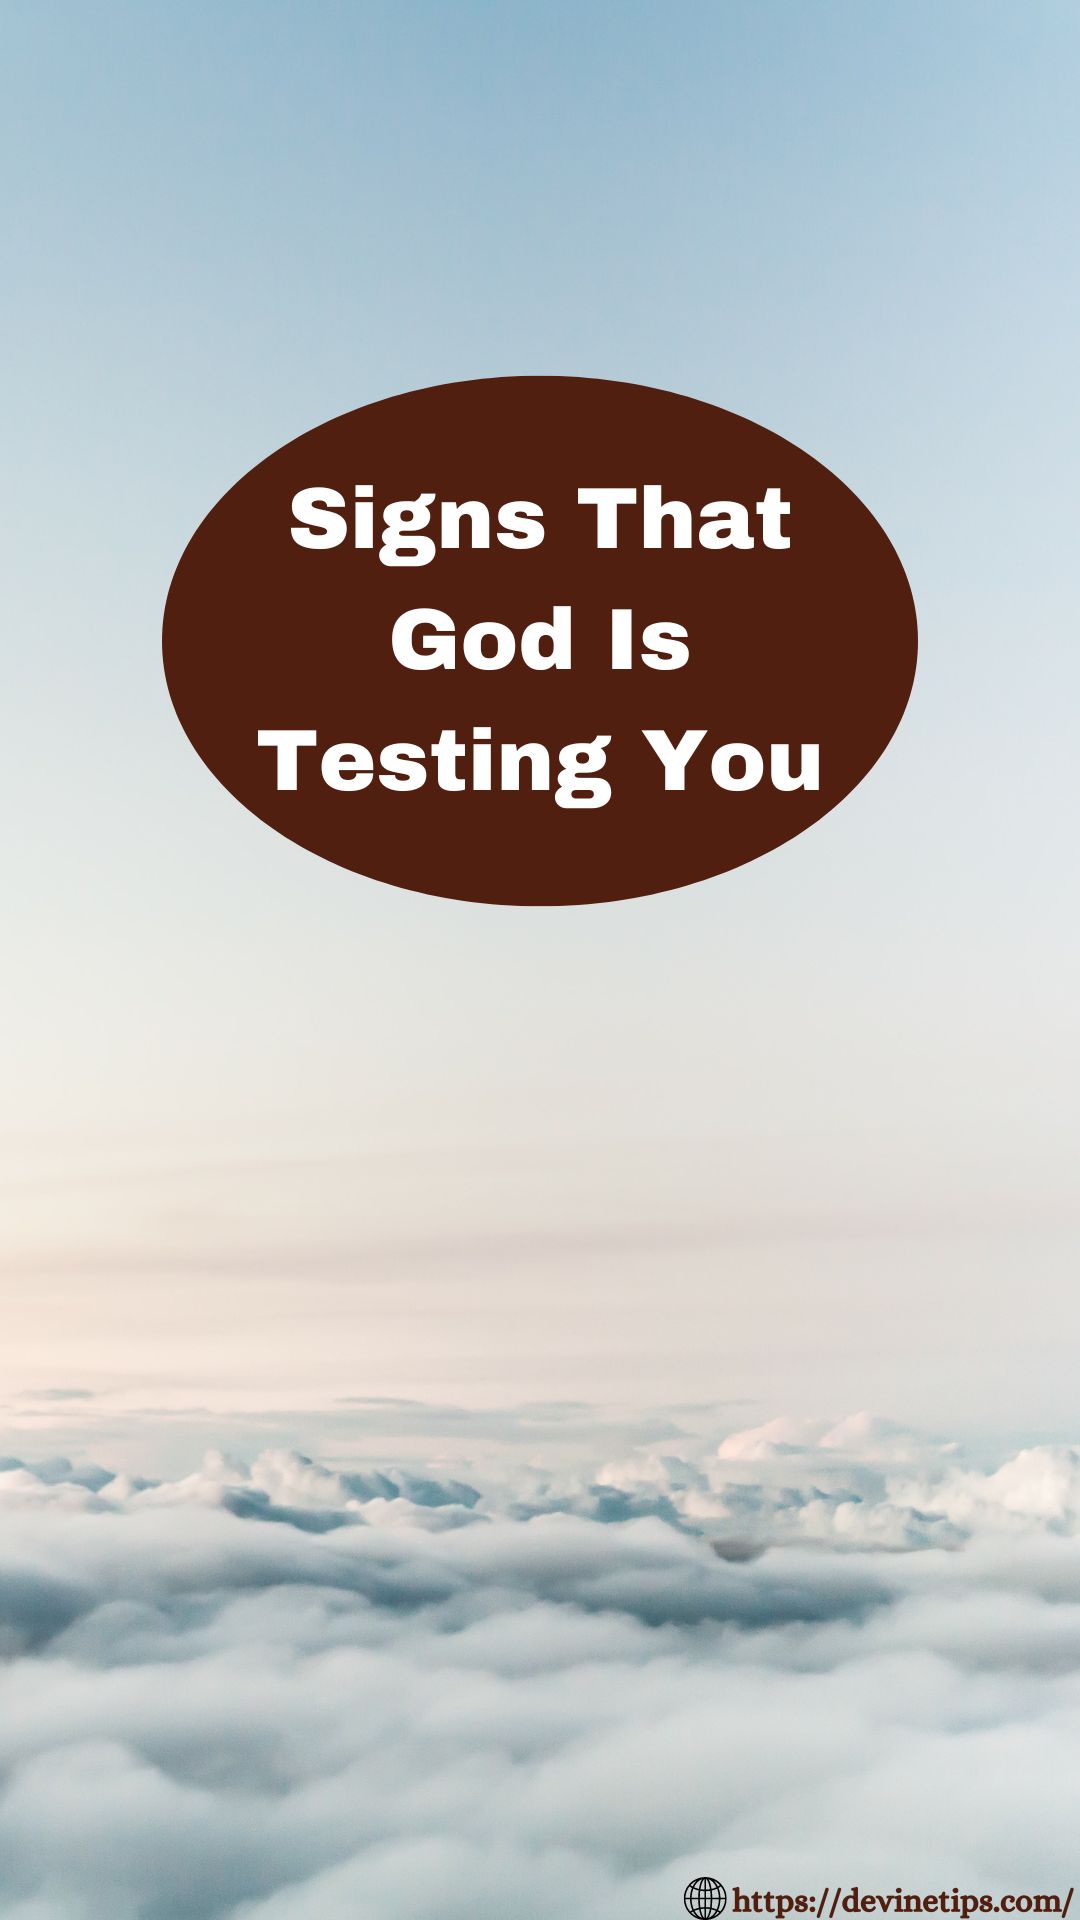 Signs That God Is Testing You